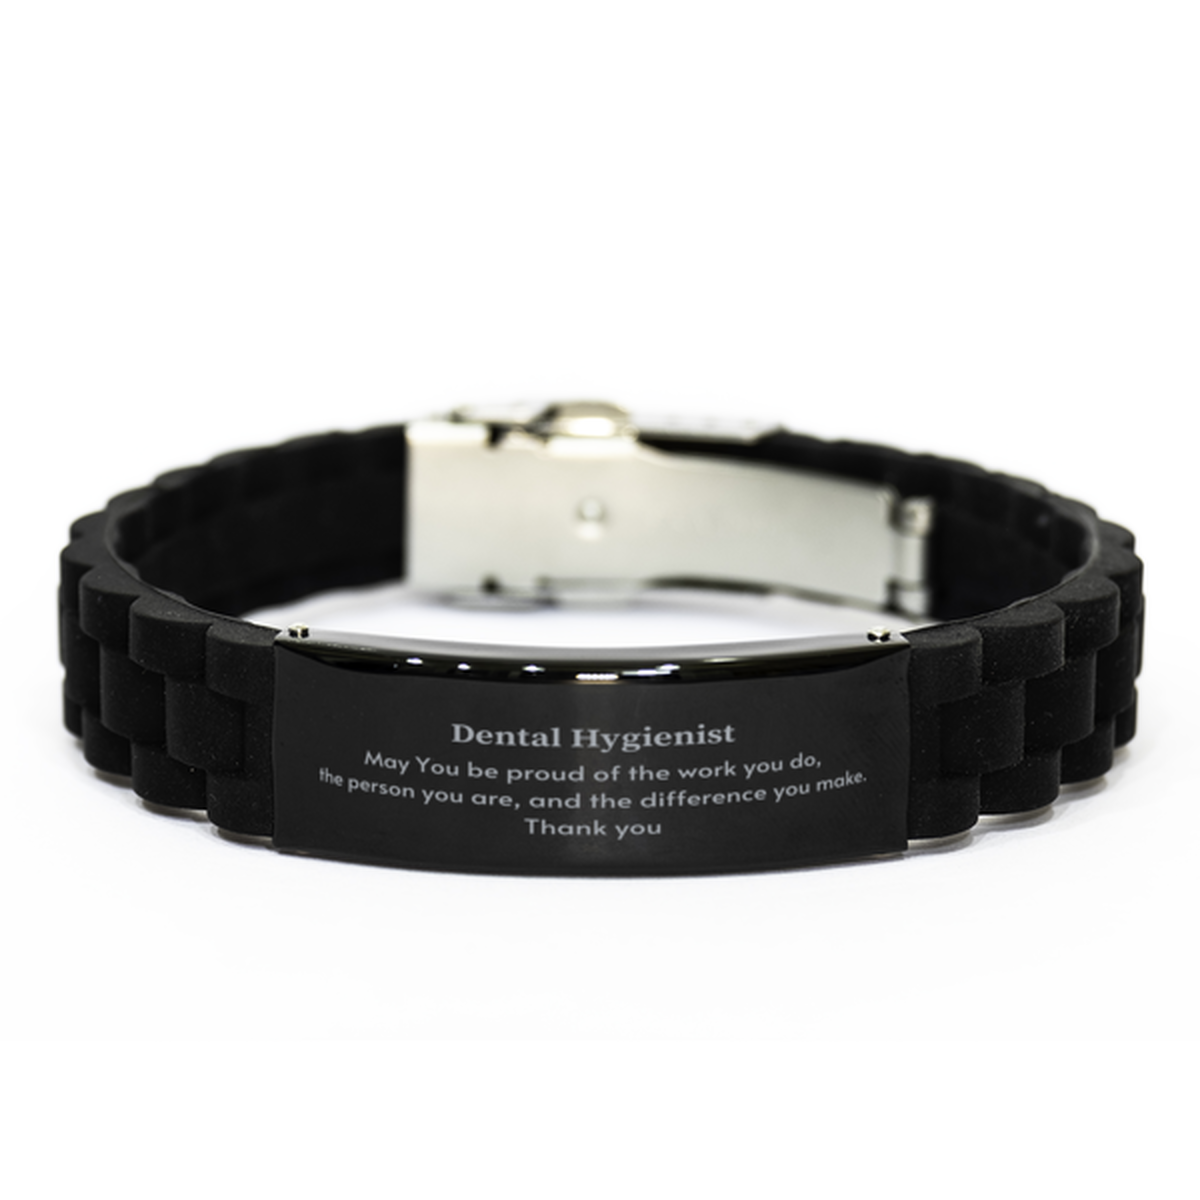 Heartwarming Black Glidelock Clasp Bracelet Retirement Coworkers Gifts for Dental Hygienist, Dental Hygienist May You be proud of the work you do, the person you are Gifts for Boss Men Women Friends